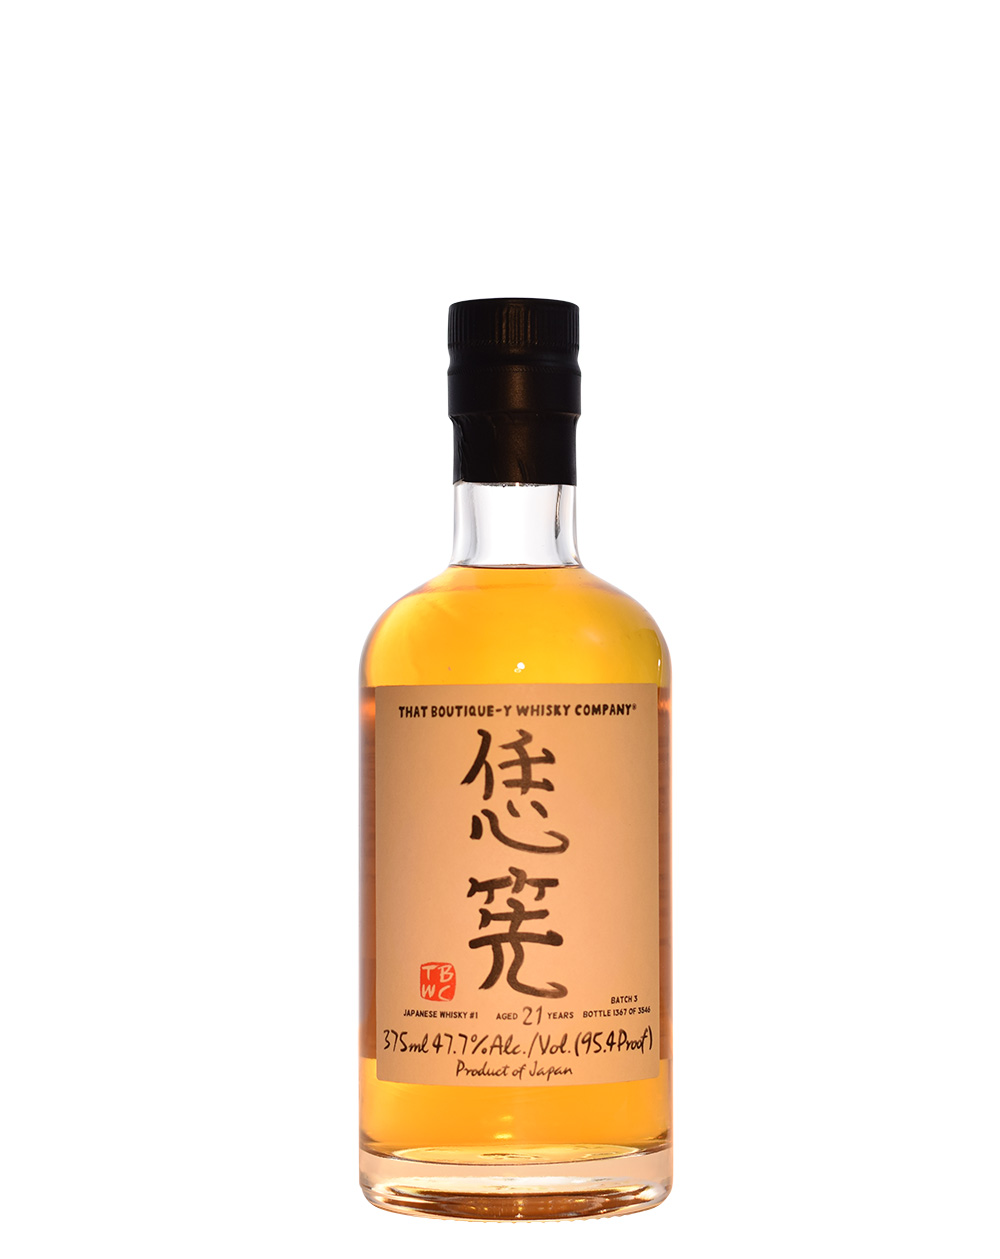 Japanese Blended Whisky #1 - That Boutique-y Whisky Company TBWC (21 Years Old) Musthave Malts MHM